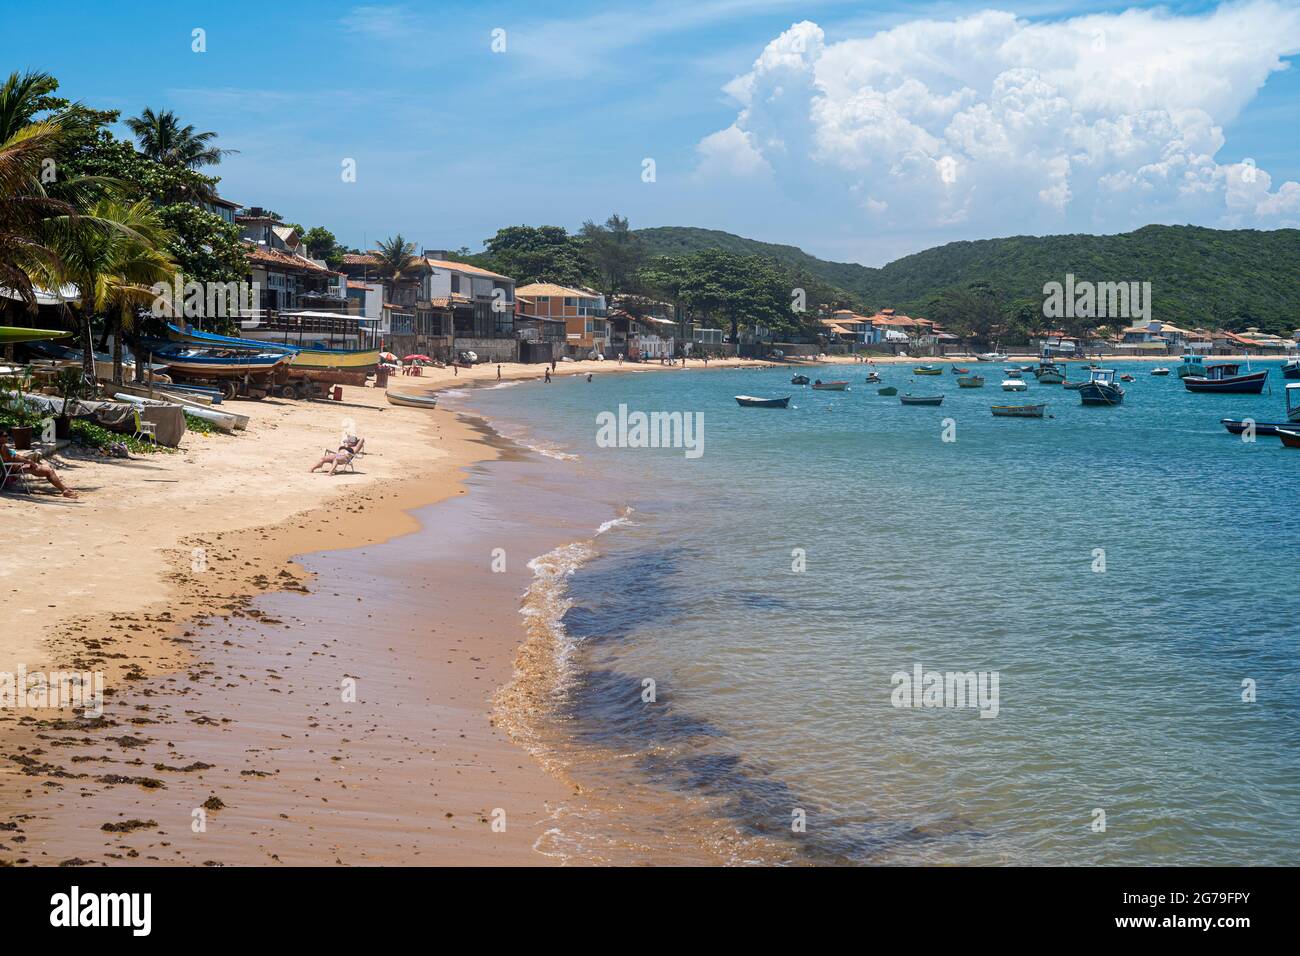 Ossos Beach in Armaço dos Buzios, a Brazilian resort. It's known as an upscale vacation destination with numerous beaches, with calm bays with water sports and surfing site Stock Photo